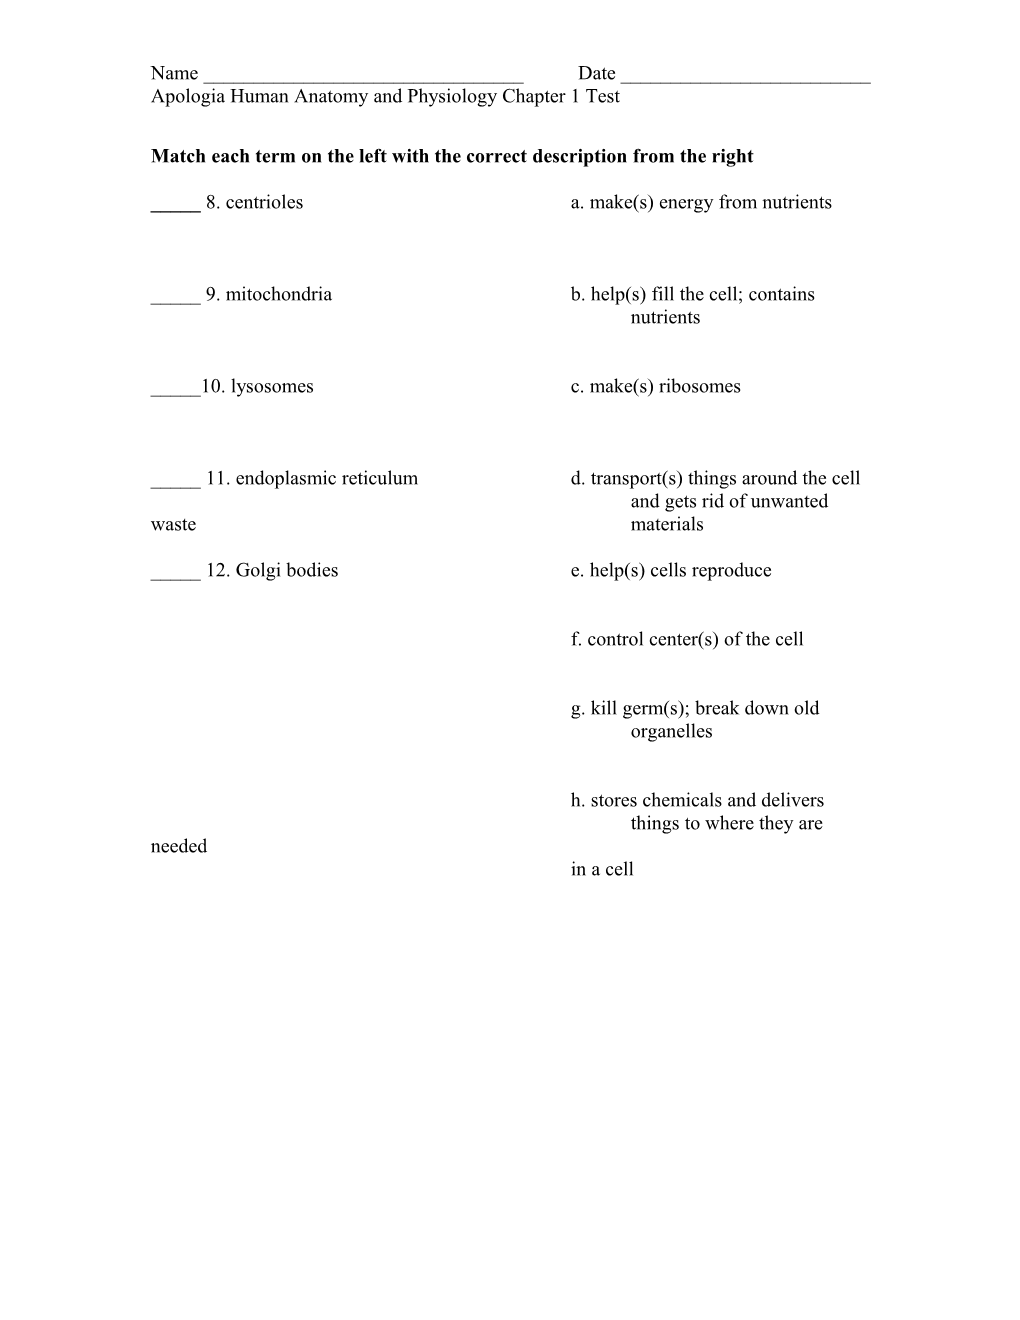 Apologia Human Anatomy and Physiology Chapter 1 Test